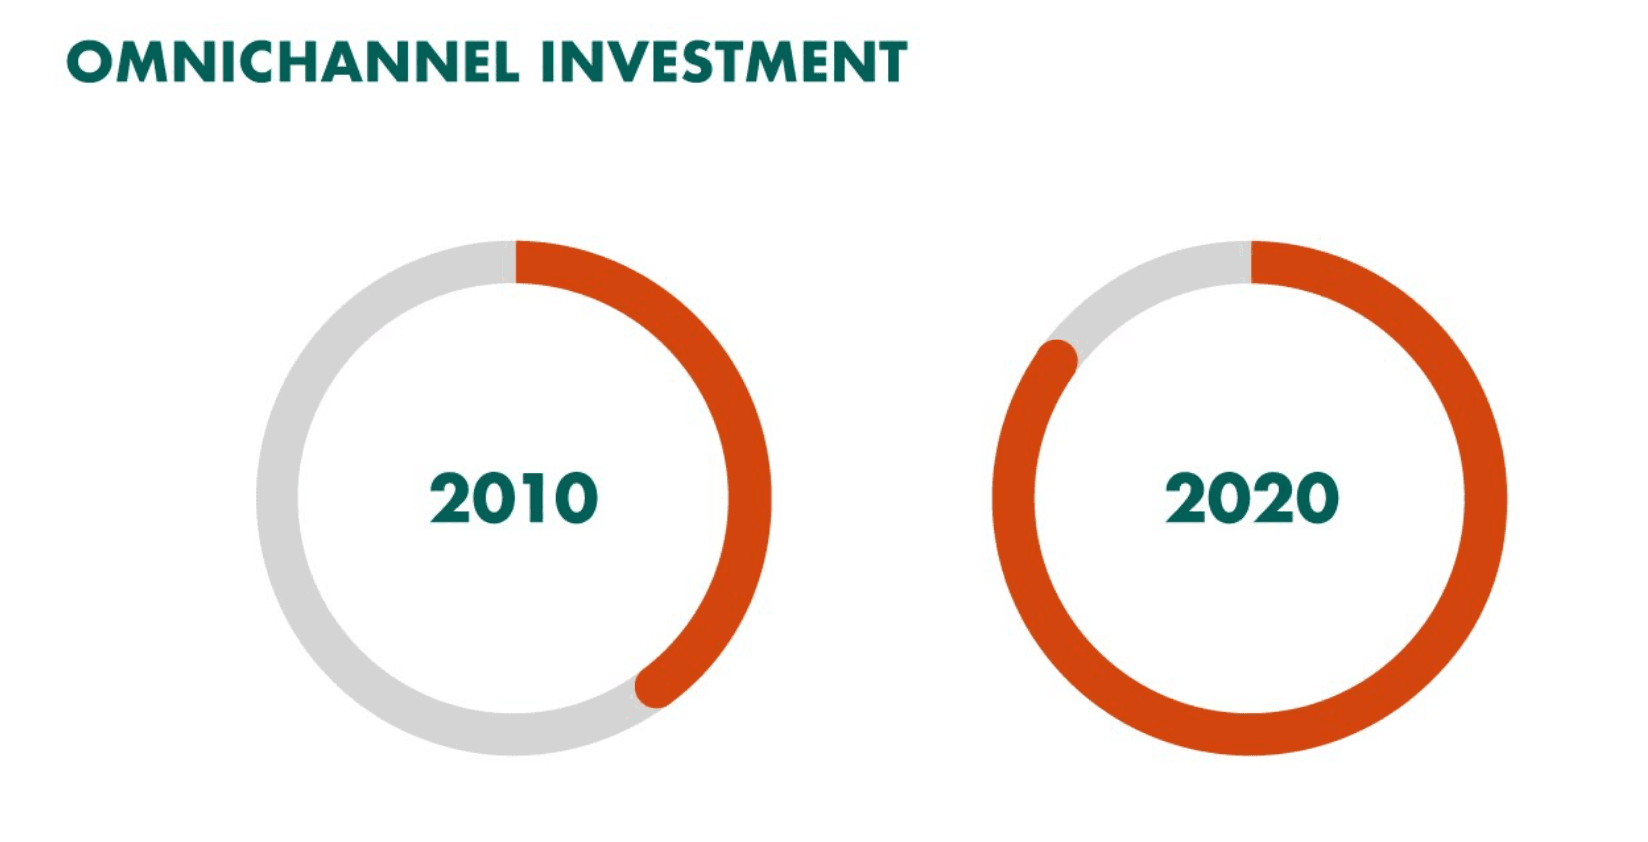 Chart showing omnichannel investment popularity